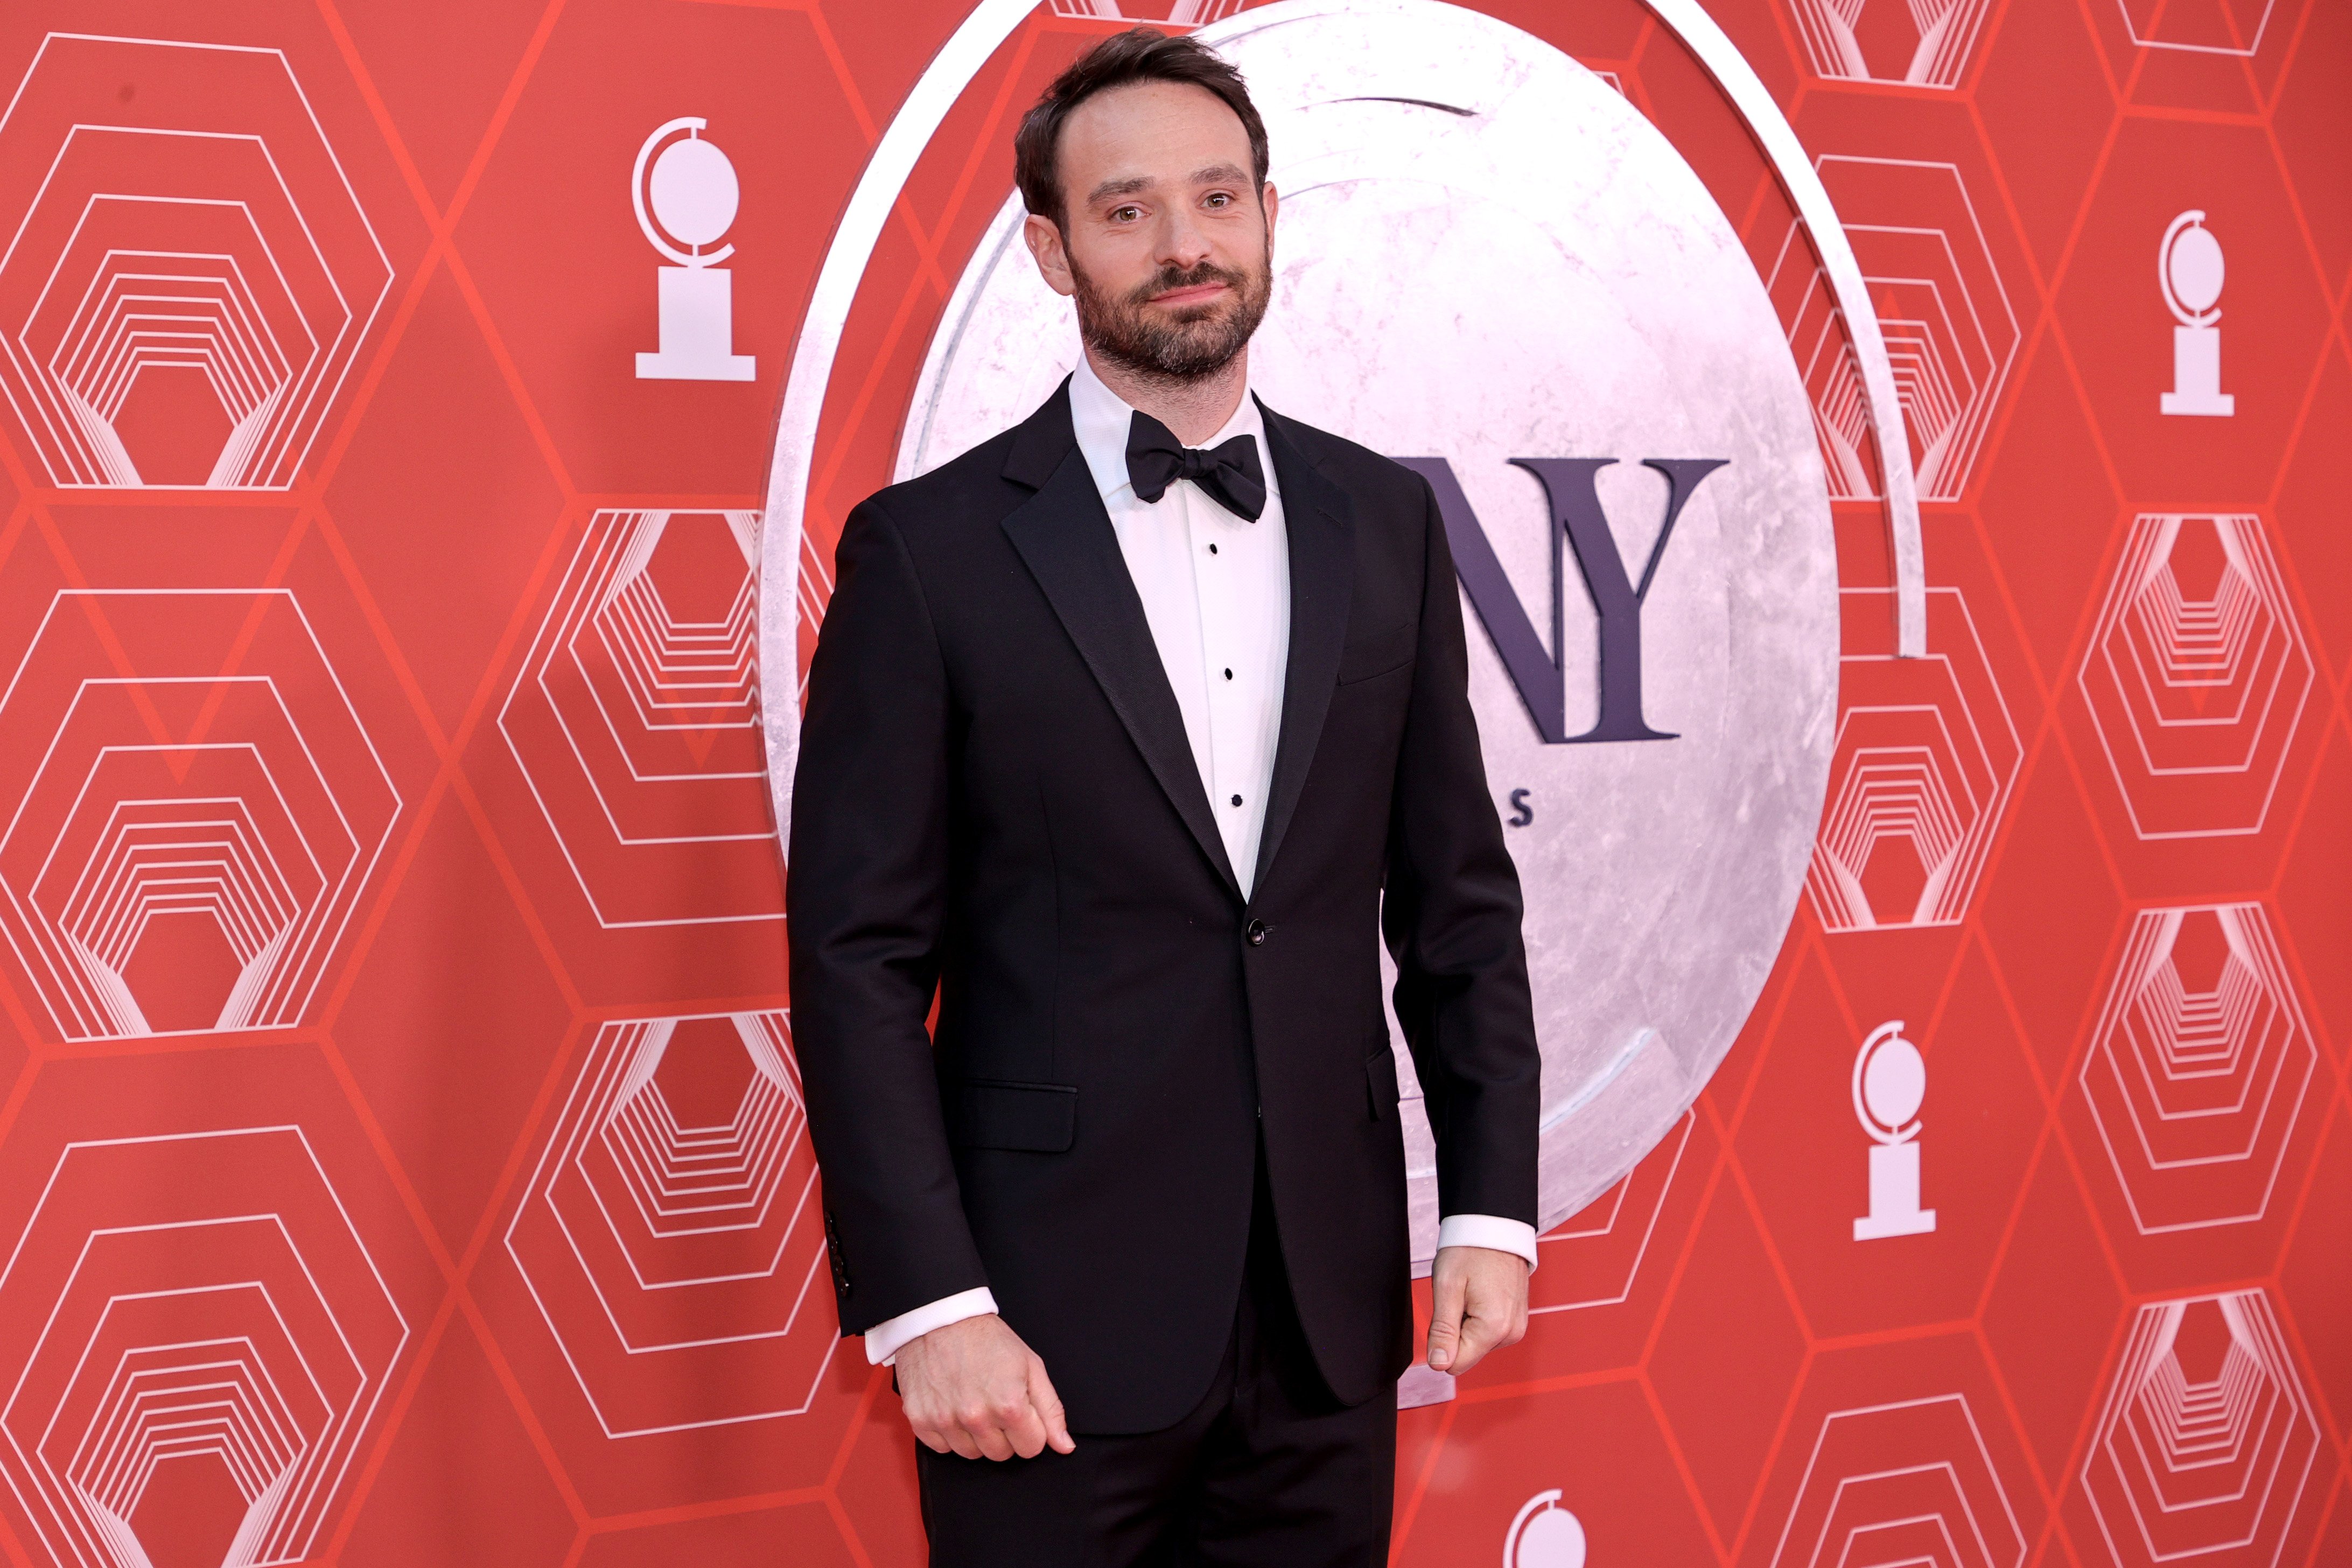 Charlie Cox, who plays Daredevil in the MCU, wears a black suit over a white button-up shirt and black bow tie.